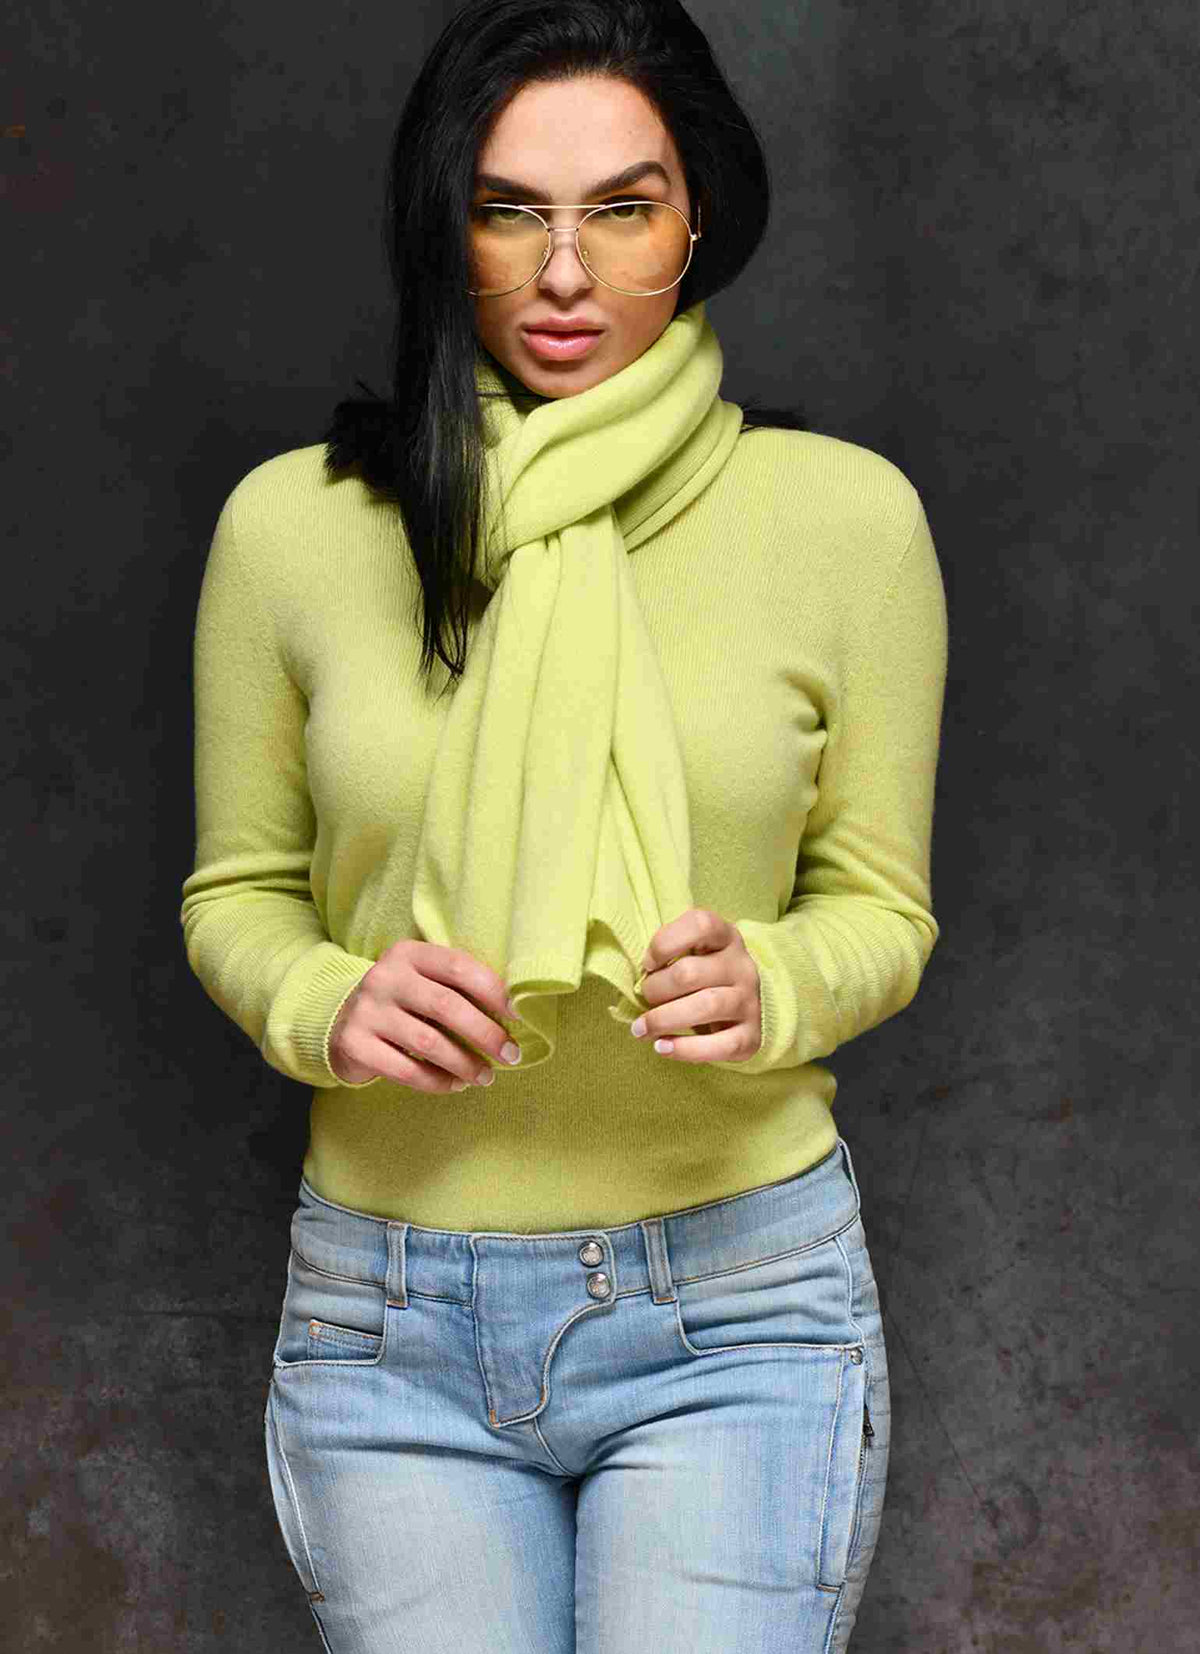 Women wearing Carmen Sol cashmere scarf with matching cashmere and sunglasses in color yellow